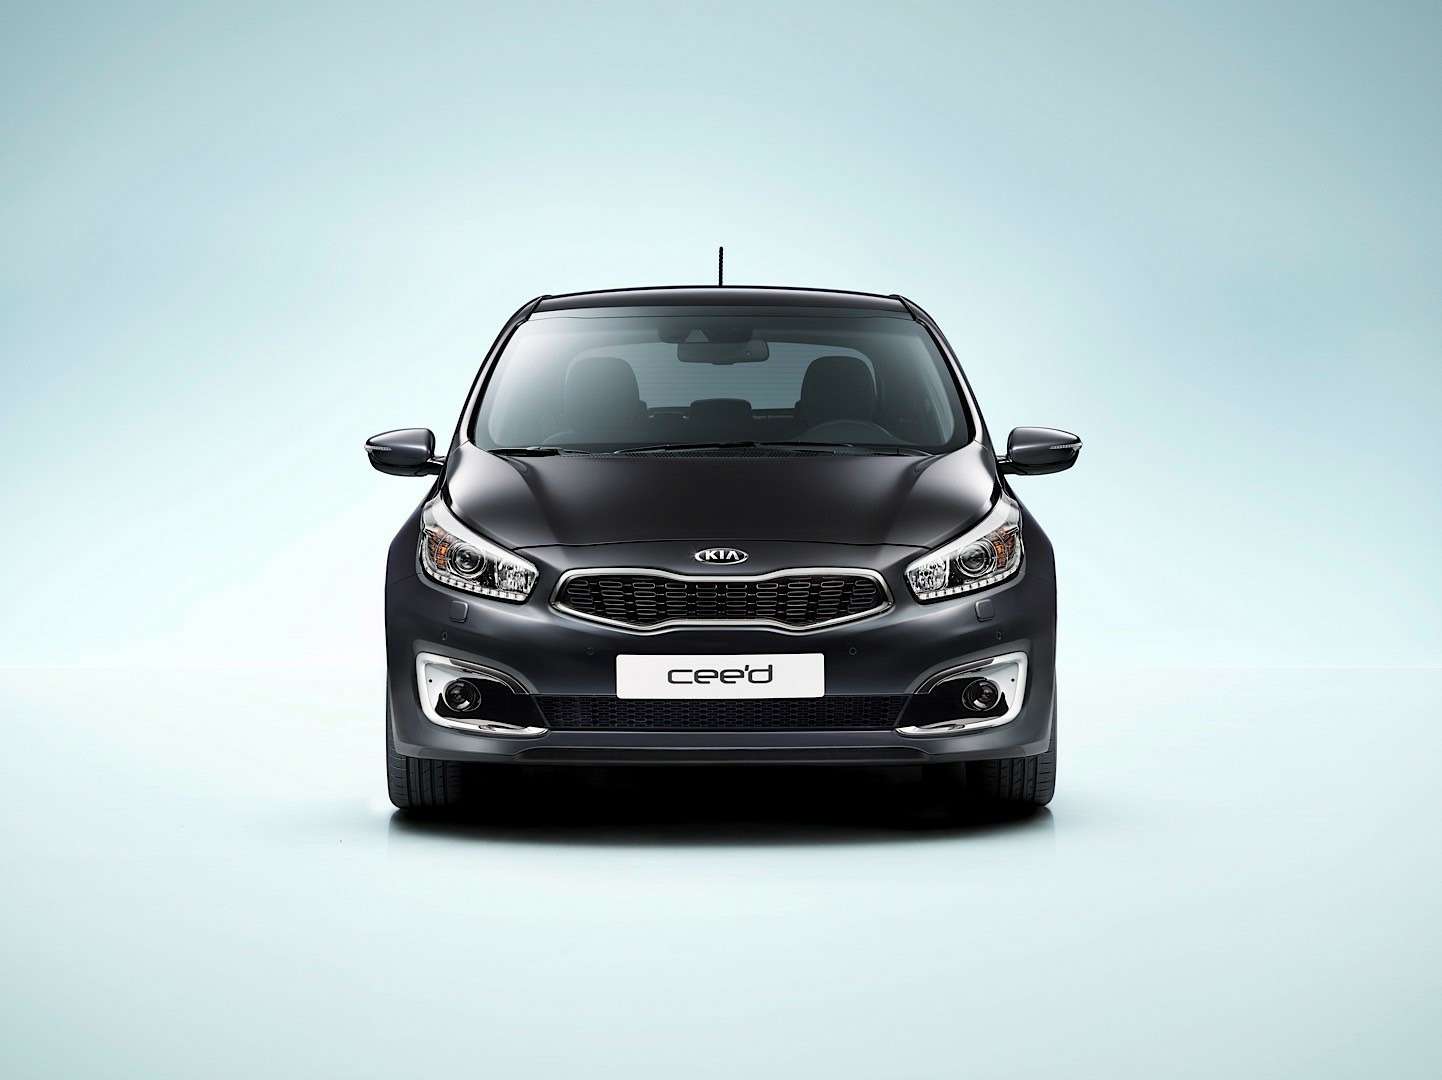 2016-kia-cee-d-brings-subtle-visual-upgrades-new-engines-and-sporty-gt-line-photo-gallery_7